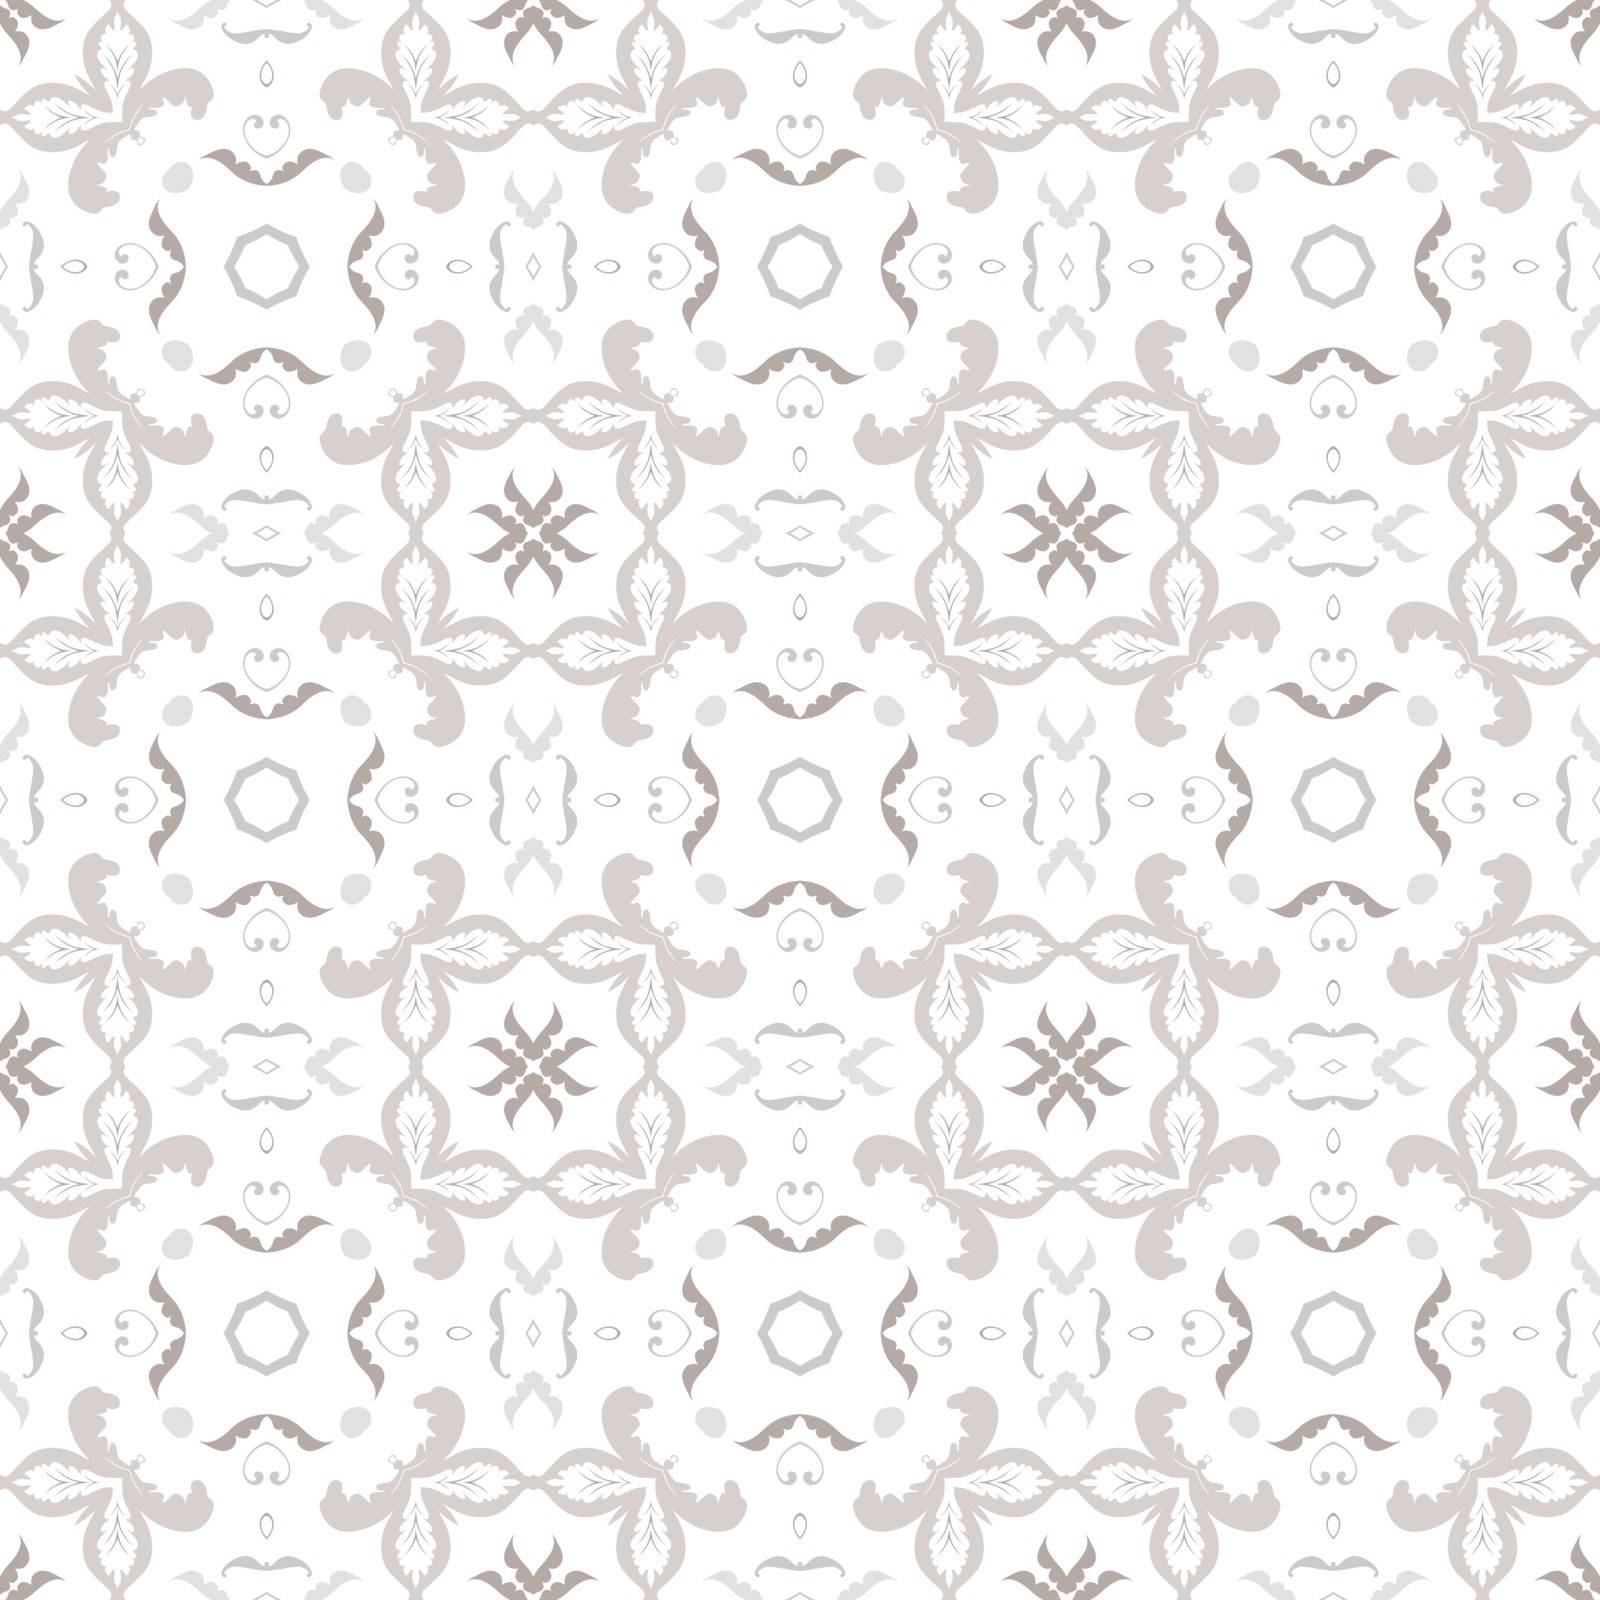 Seamless pattern made of grey floral elements on white background